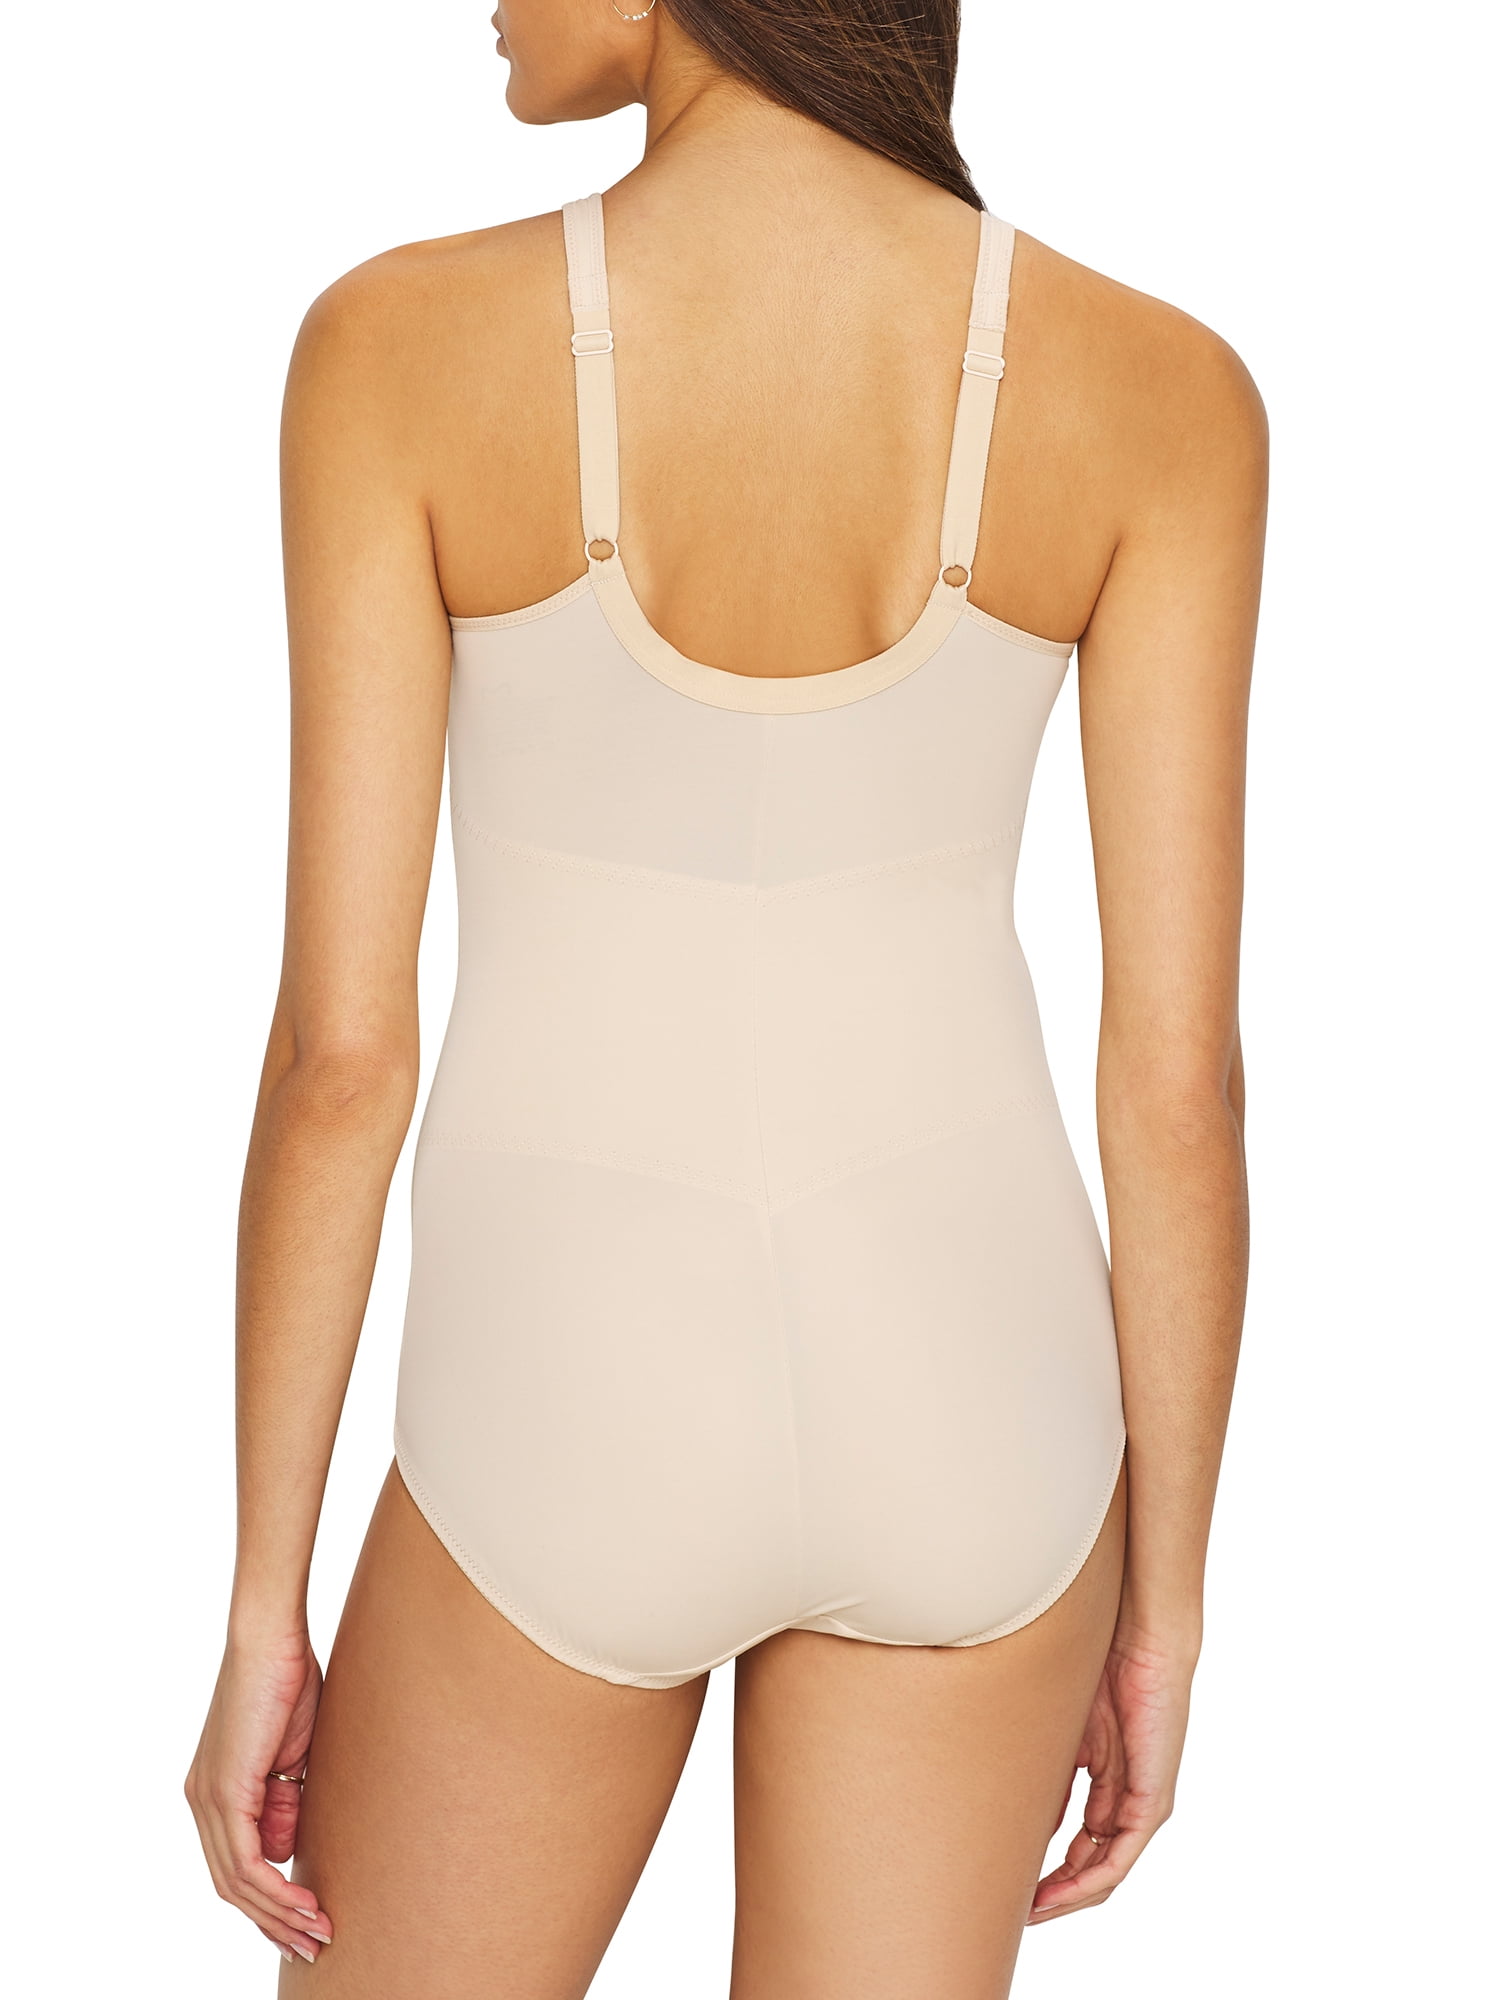 Maidenform Womens Firm Control Shaping Bodysuit Style-DM5020